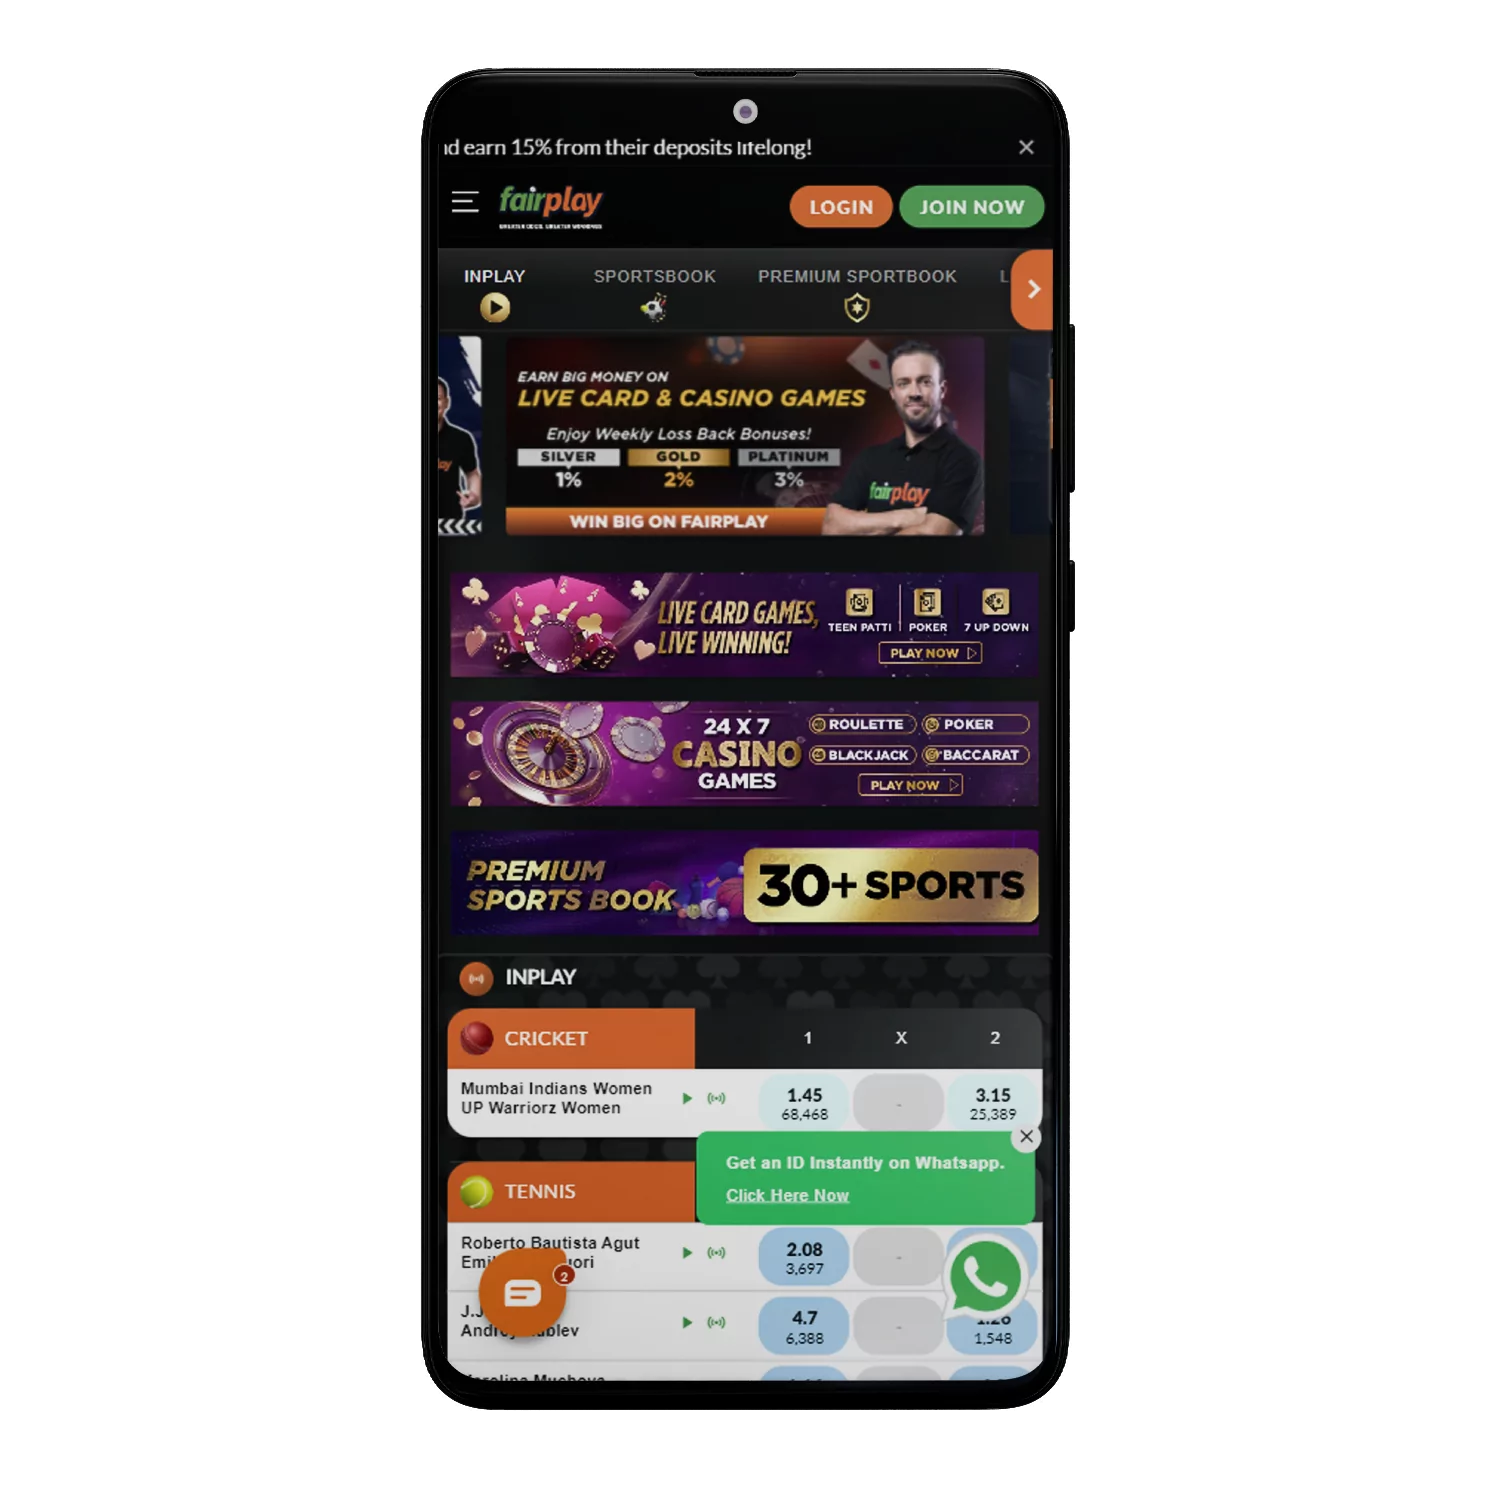 You can place bets and win real money in the Fairplay app.